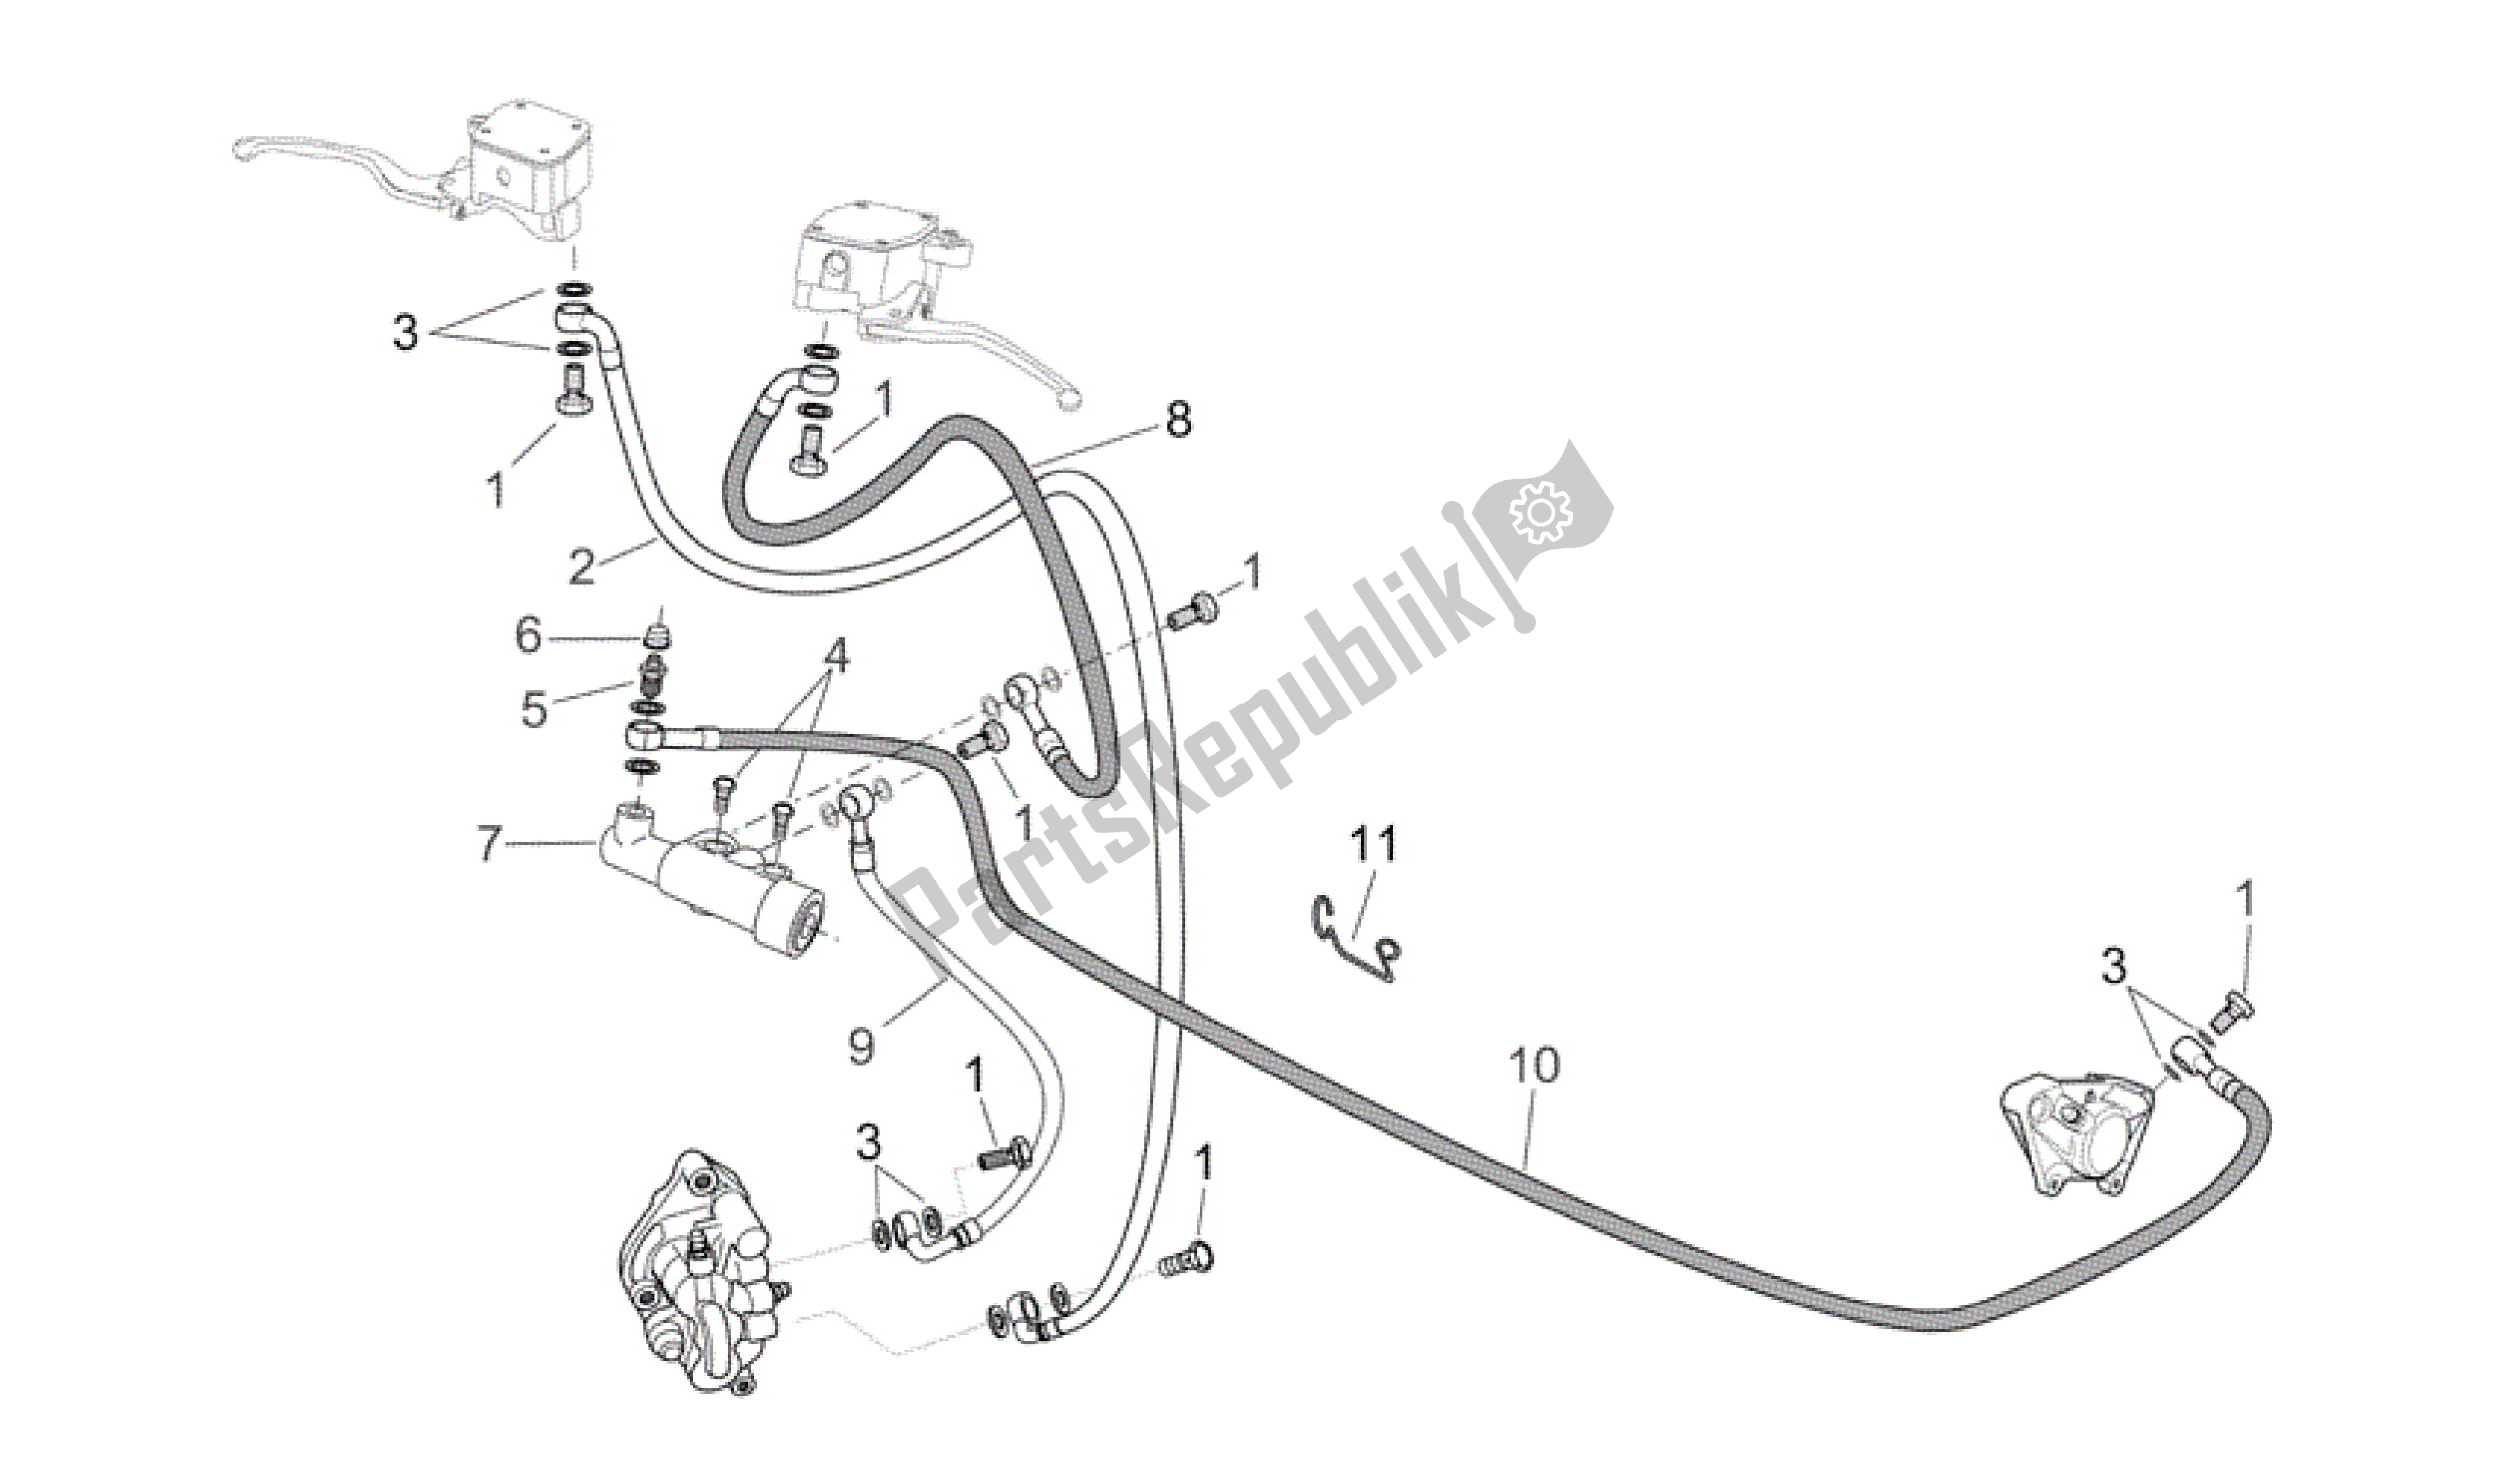 All parts for the Front/rear Brake System of the Aprilia Scarabeo 125 2004 - 2006